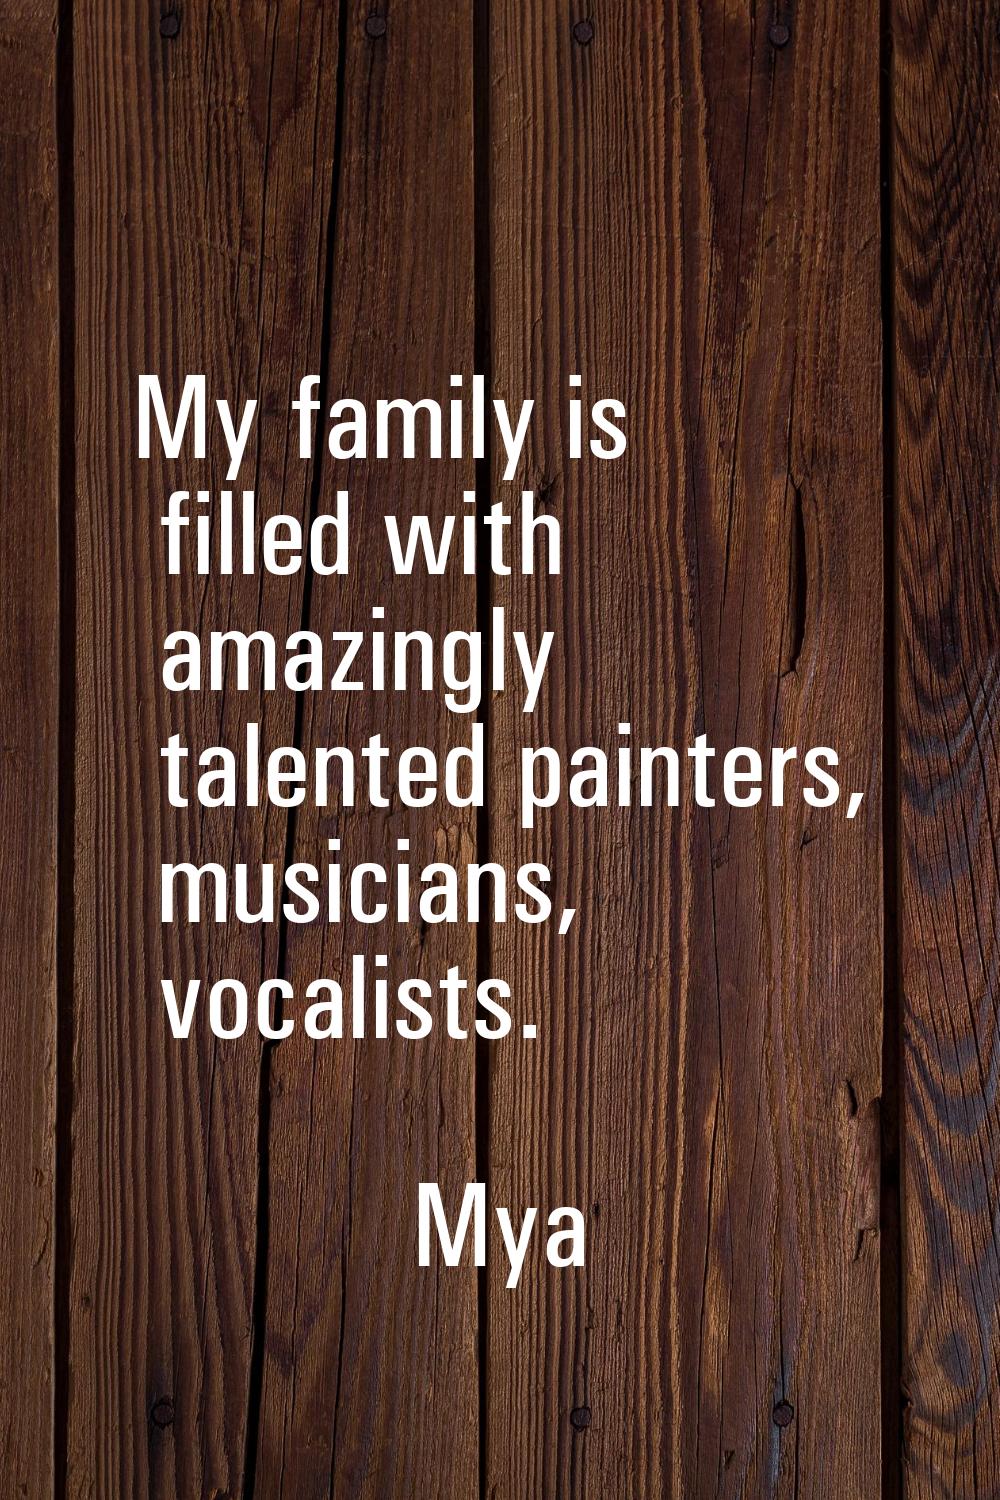 My family is filled with amazingly talented painters, musicians, vocalists.